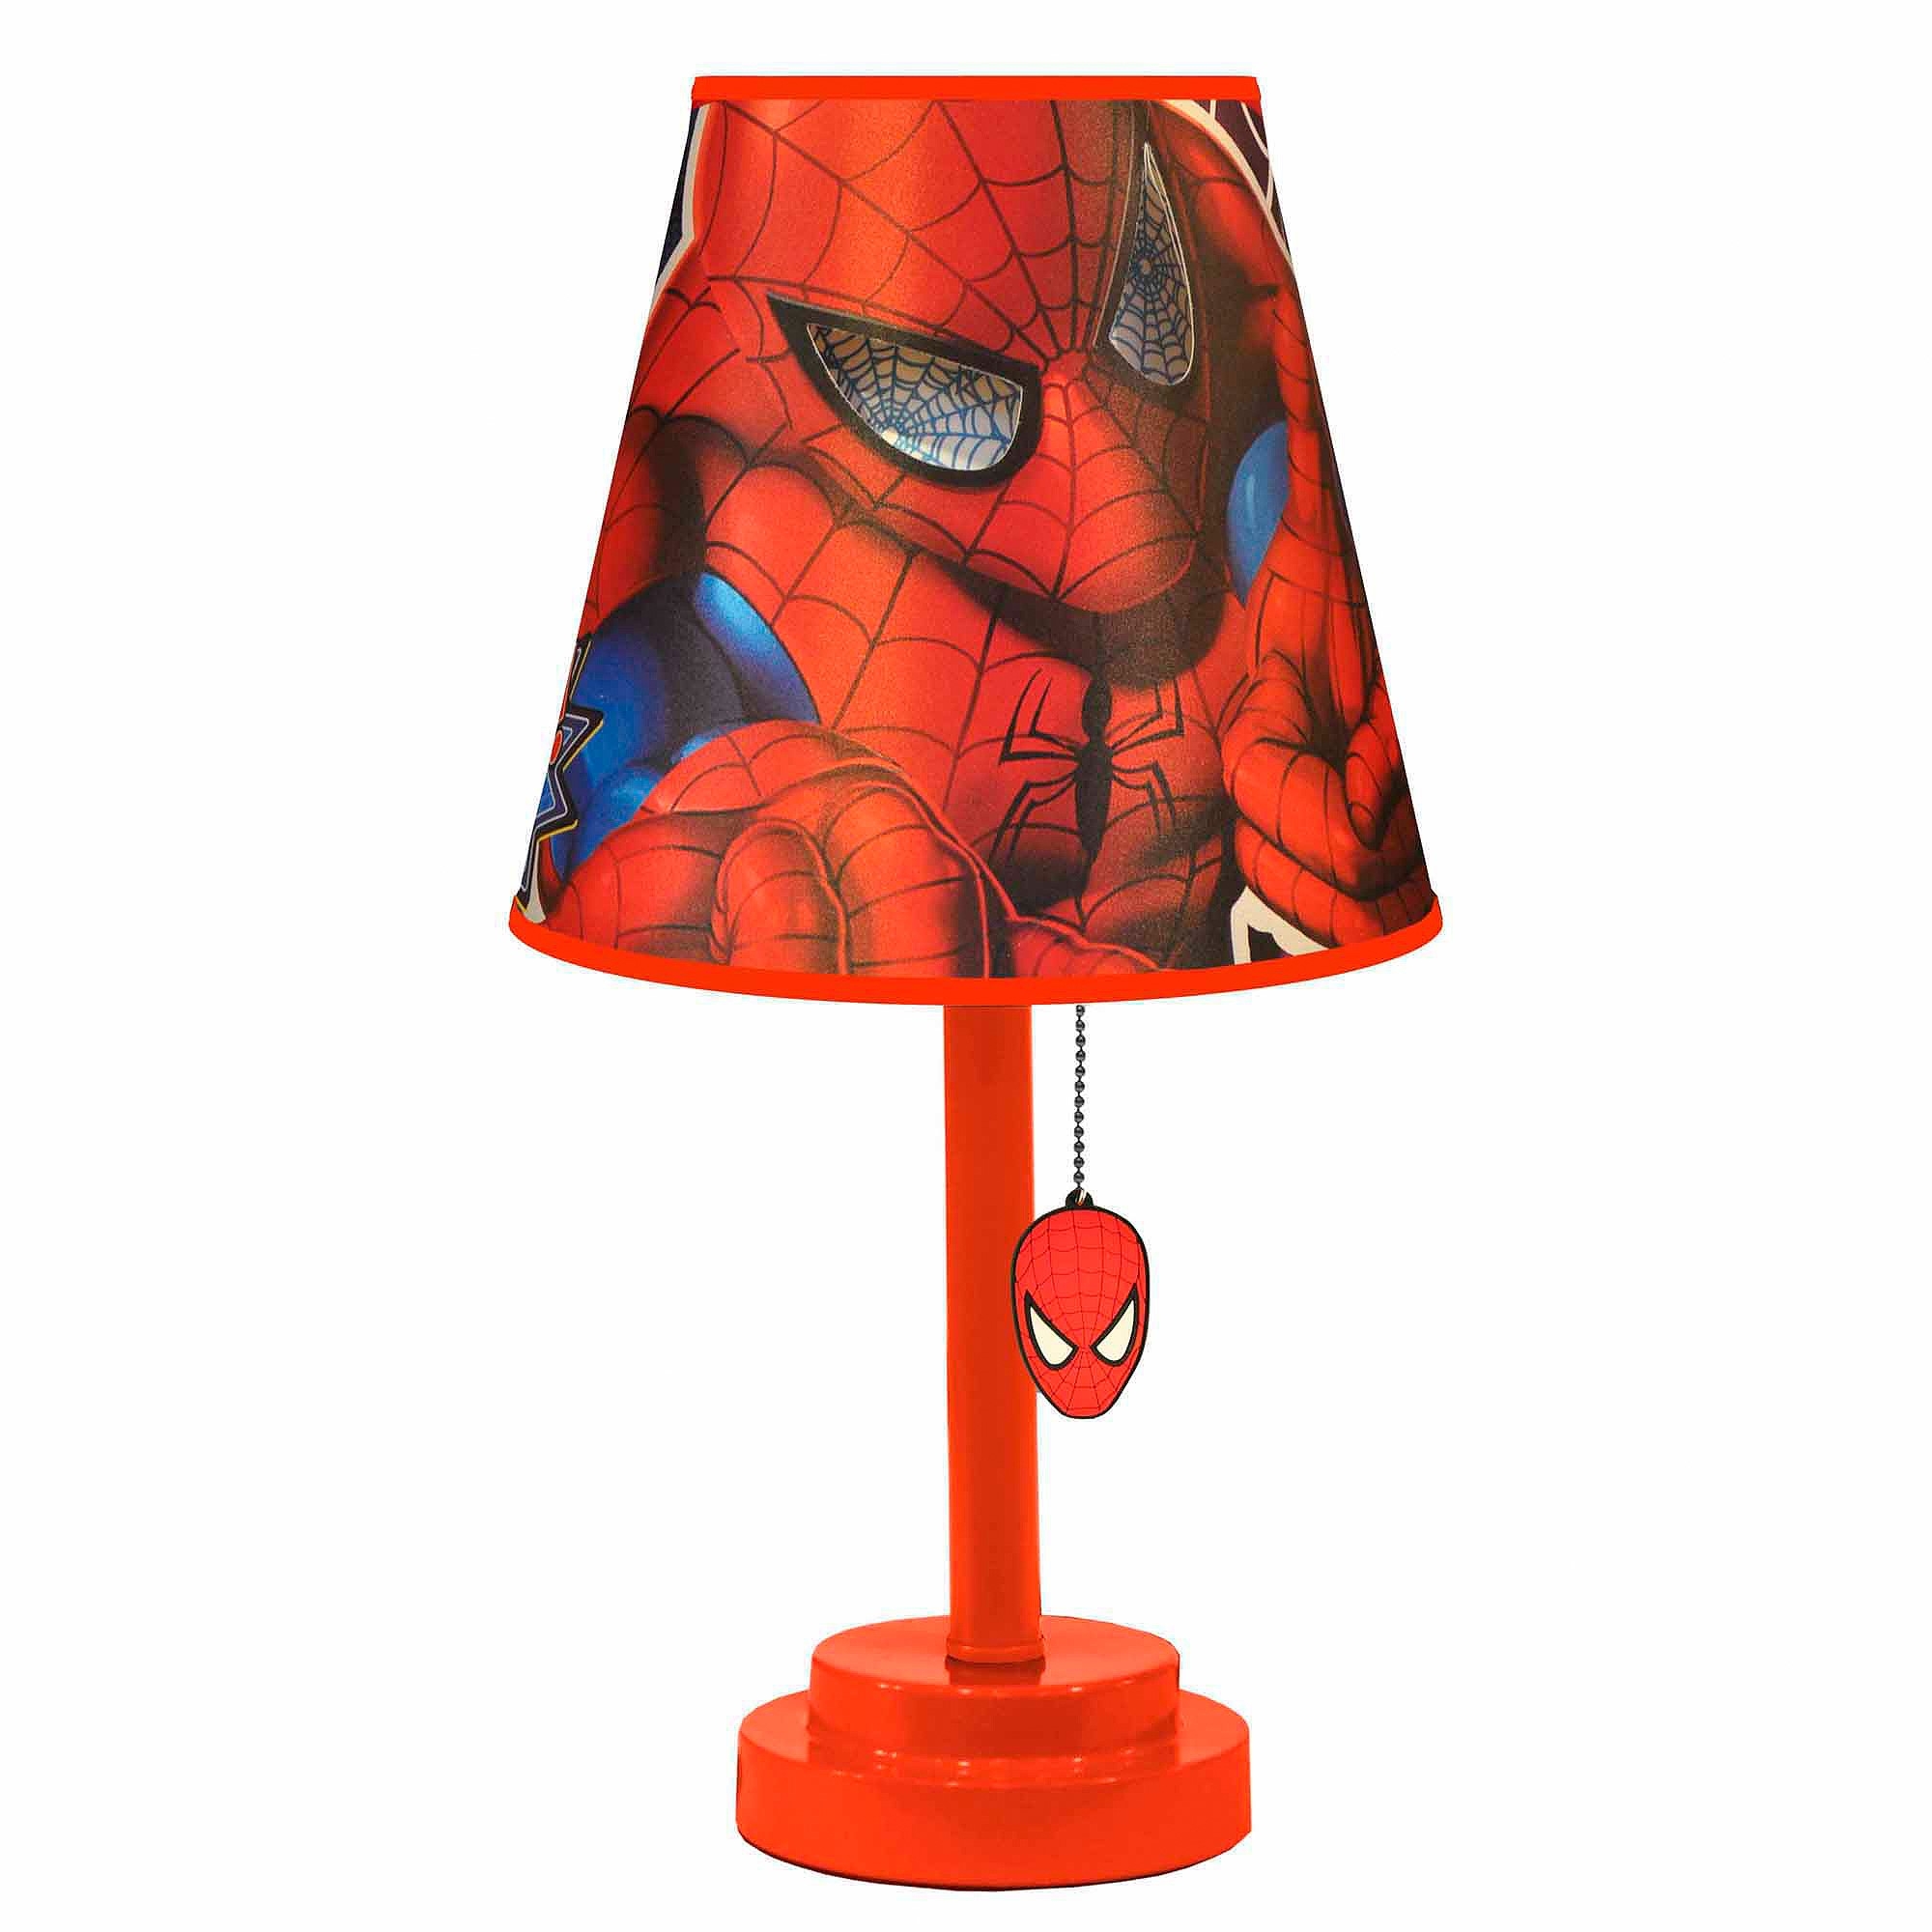 Spider Man Table Lamp Ideas on Foter